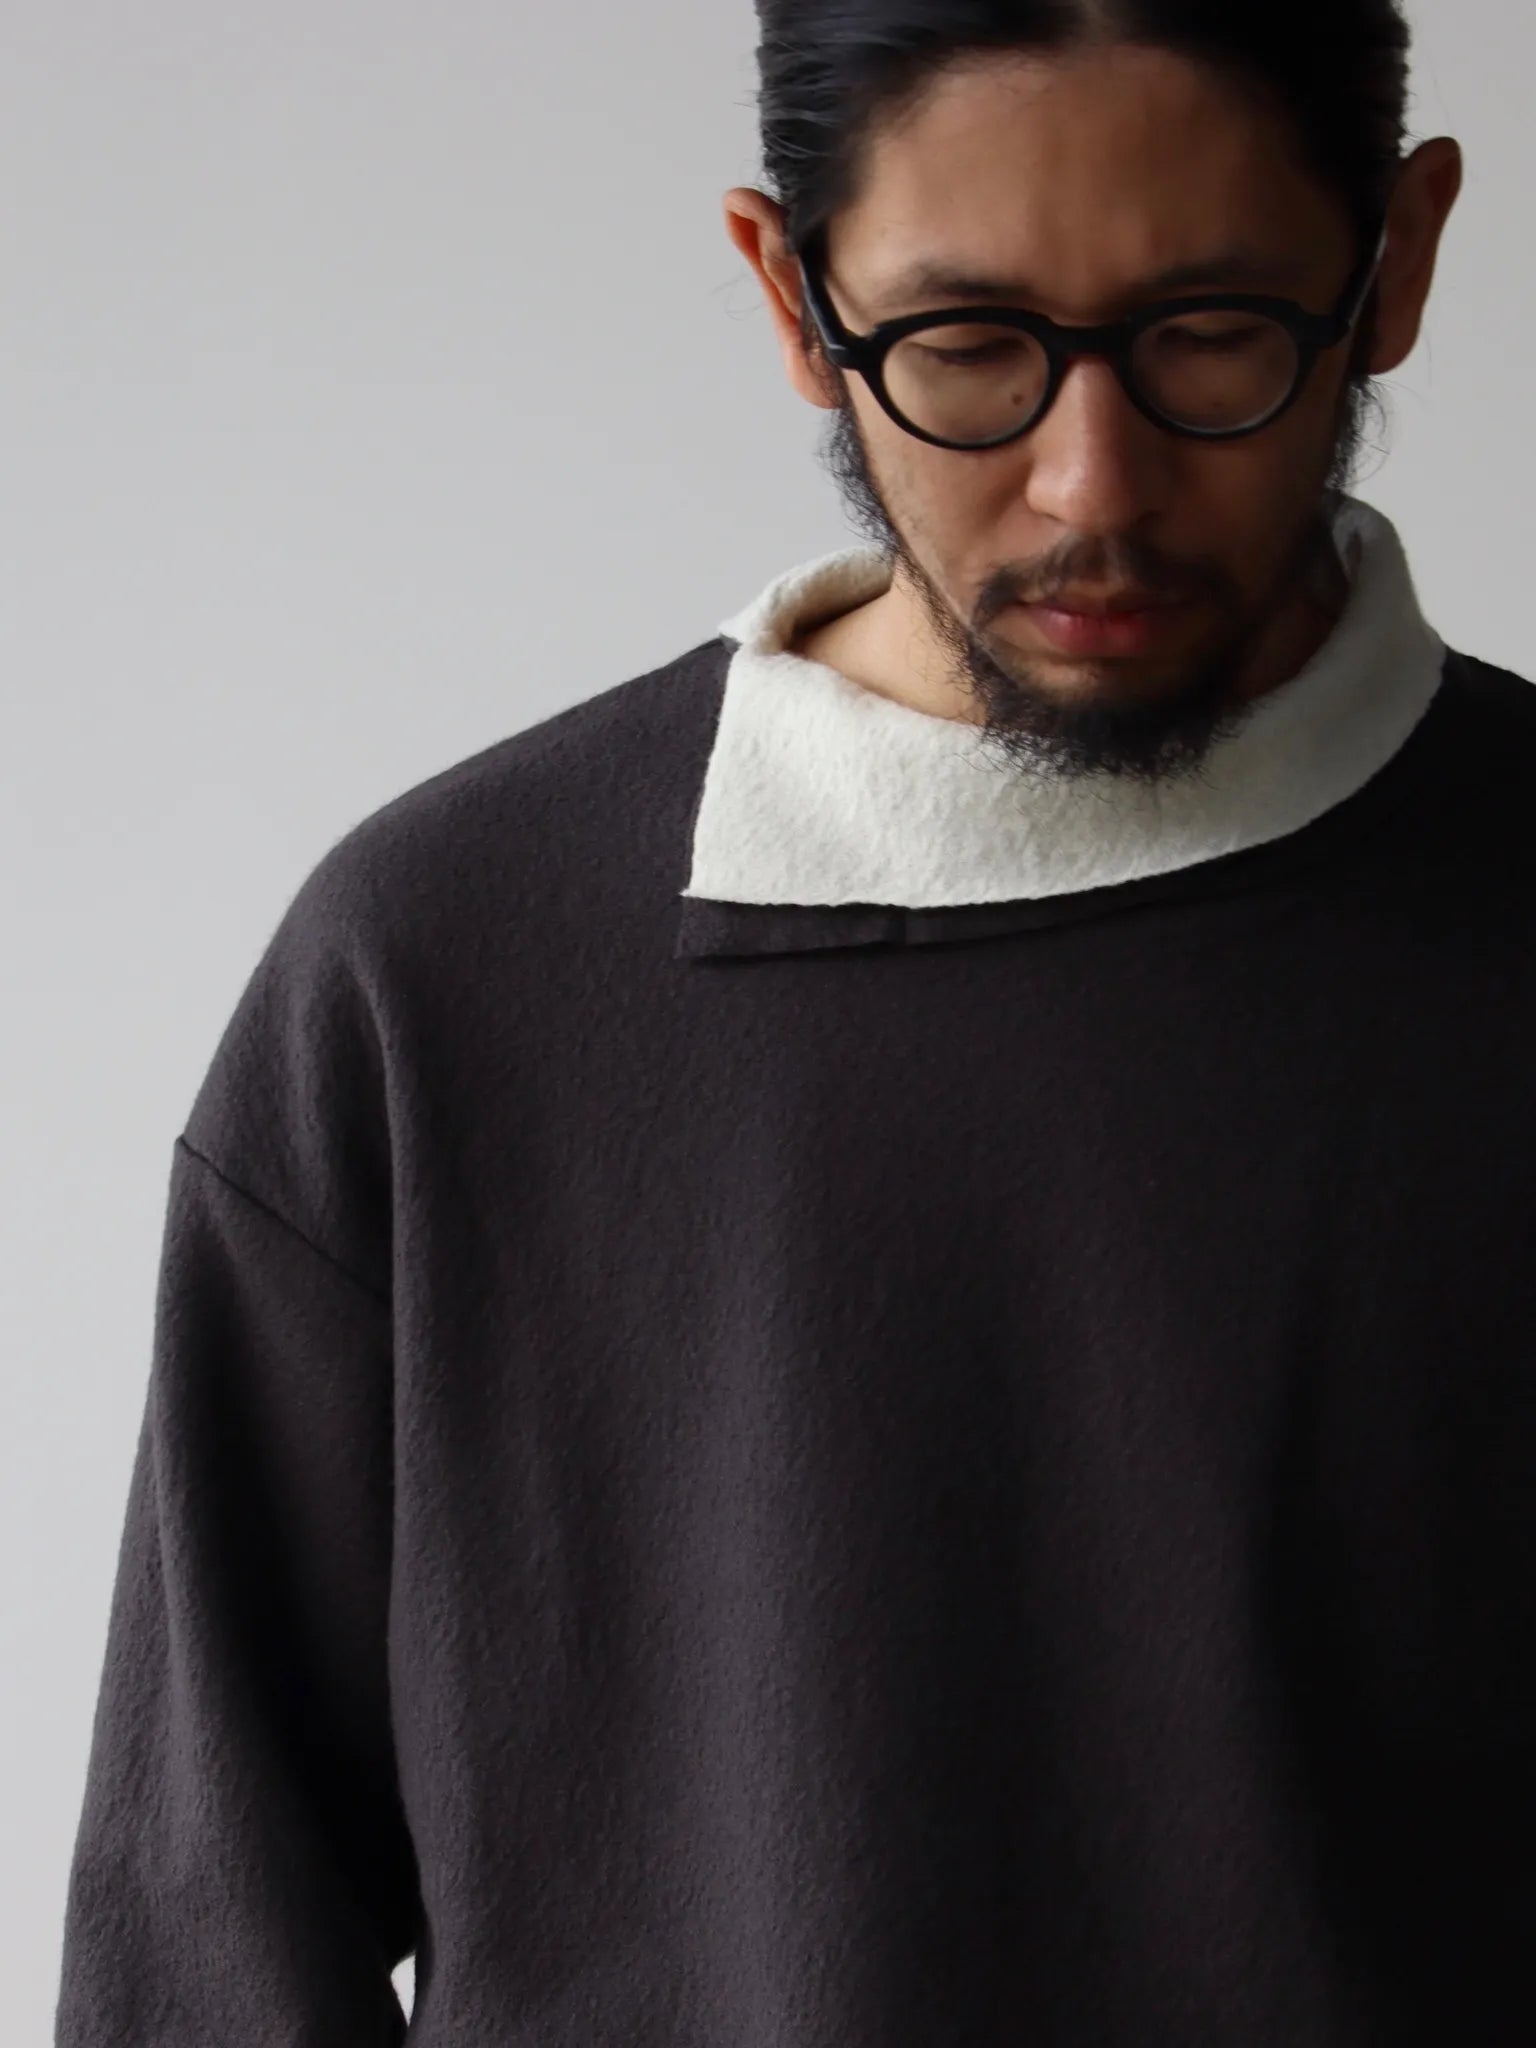 amachi-double-layer-wool-top-offf-white-x-flint-gray-9